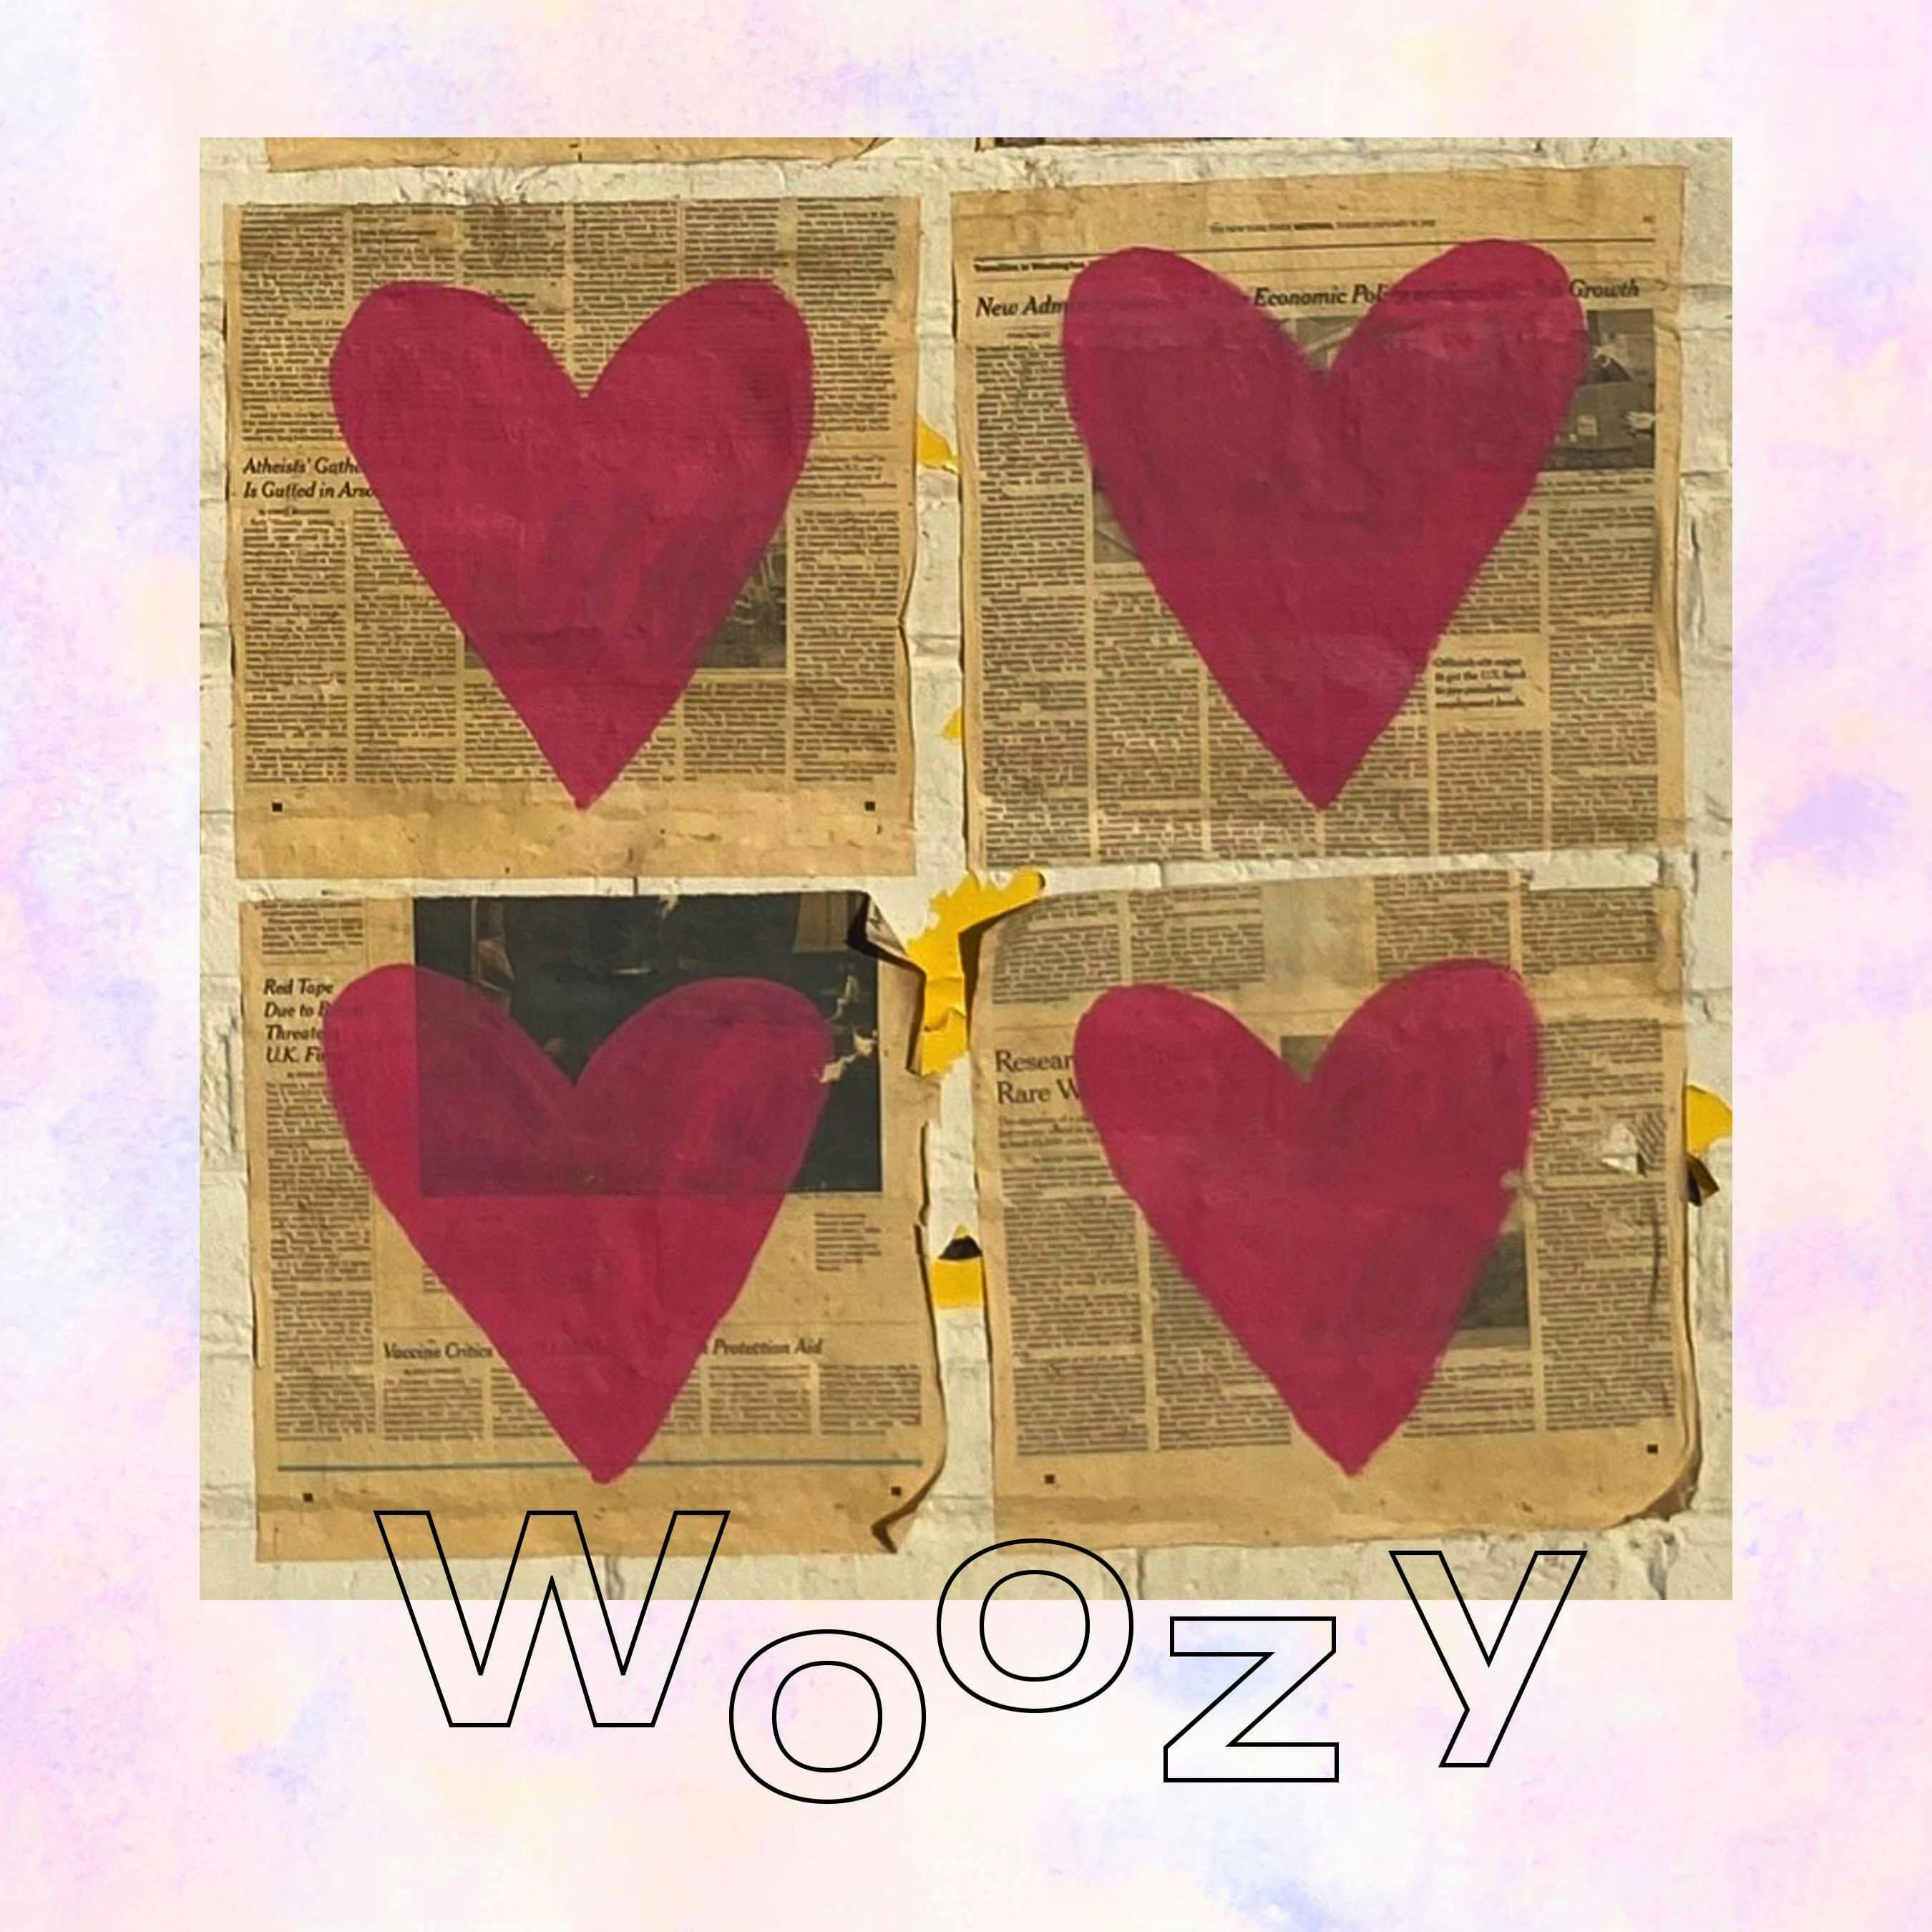 Cover art for Maeko's song: Woozy